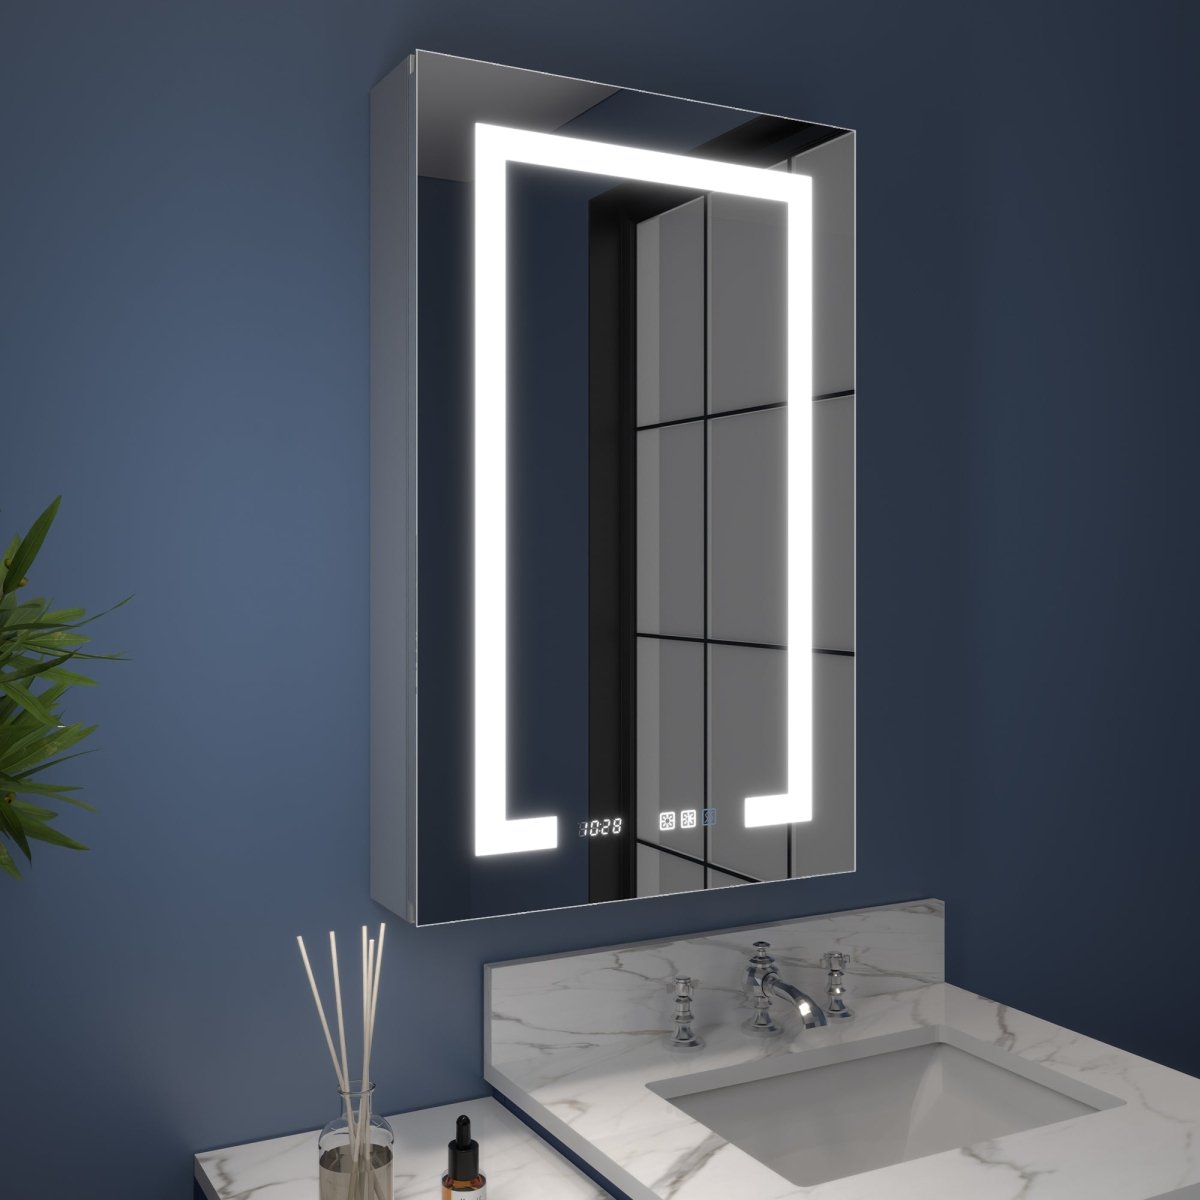 Boost-M2 20" W x 32" H Bathroom Narrow Light Medicine Cabinets with Vanity Mirror Recessed or Surface, Left Hinge